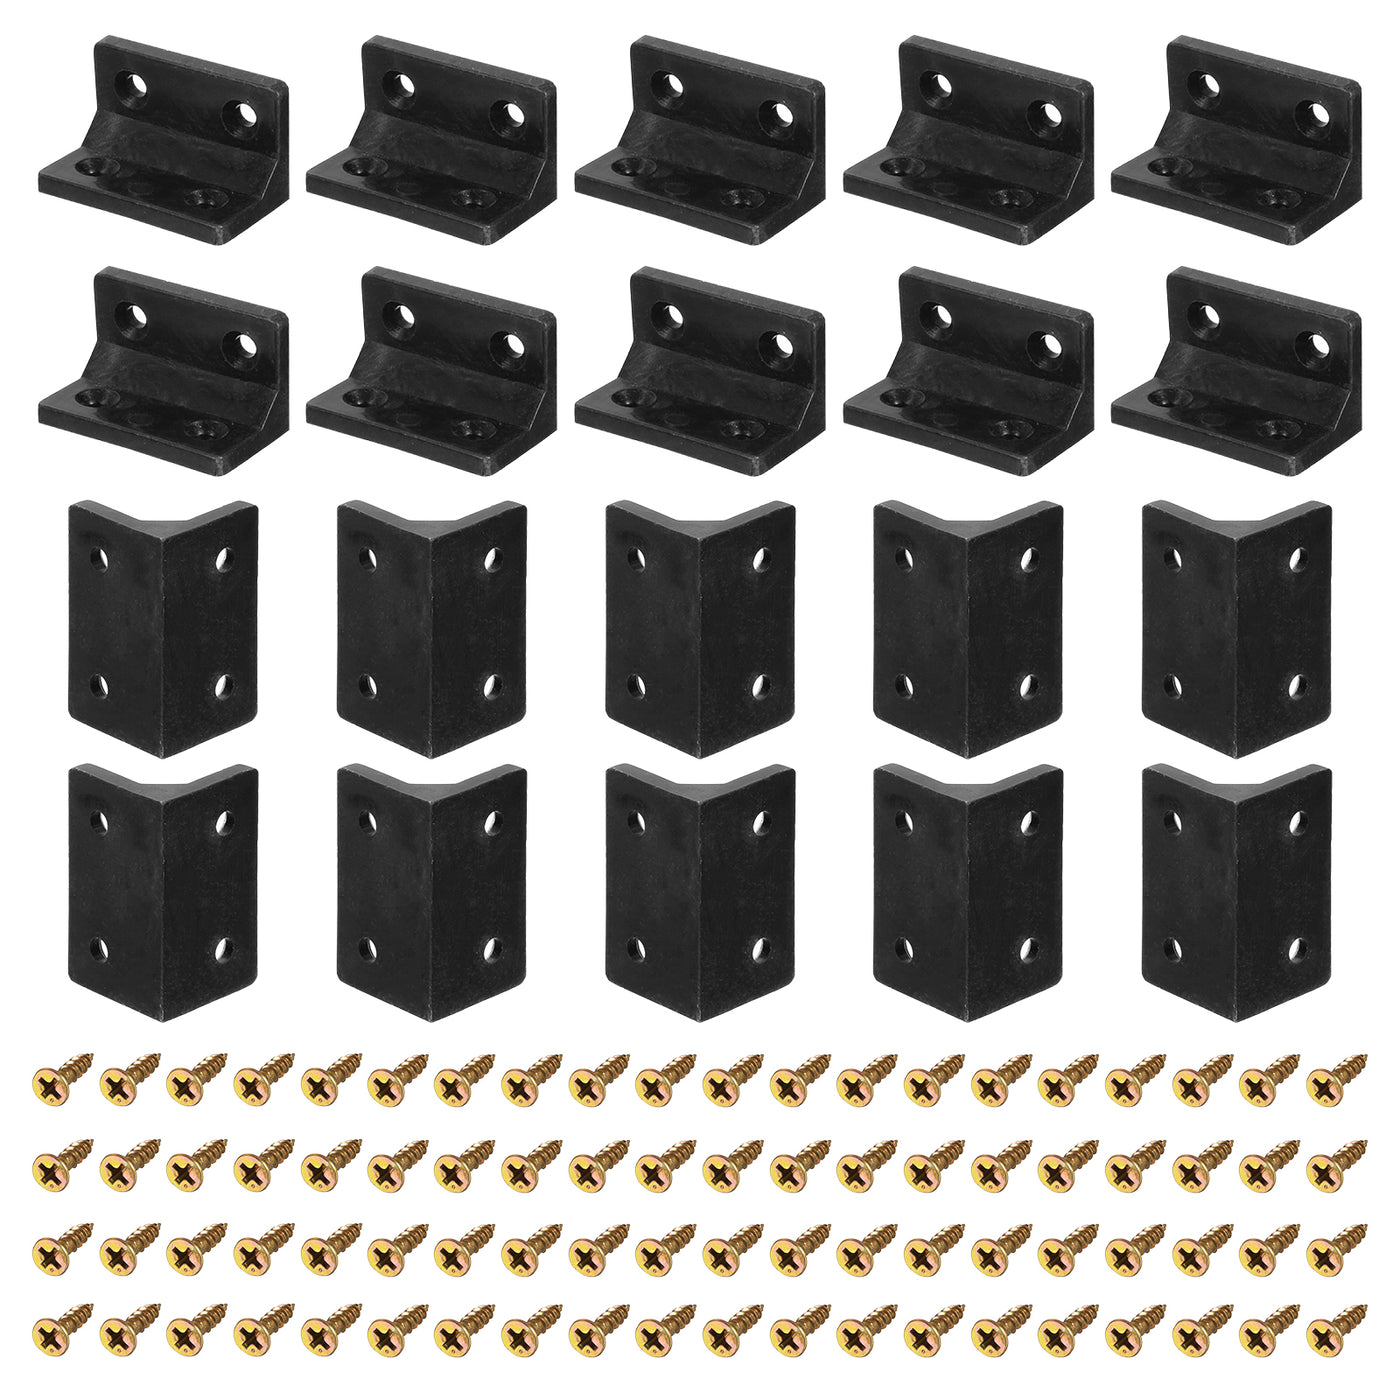 uxcell Uxcell 30Pcs 90 Degree Plastic Corner Braces, 38x22x22mm Nylon Shelf Right Angle Brackets with Screws for Cabinets, Cupboards (Black)